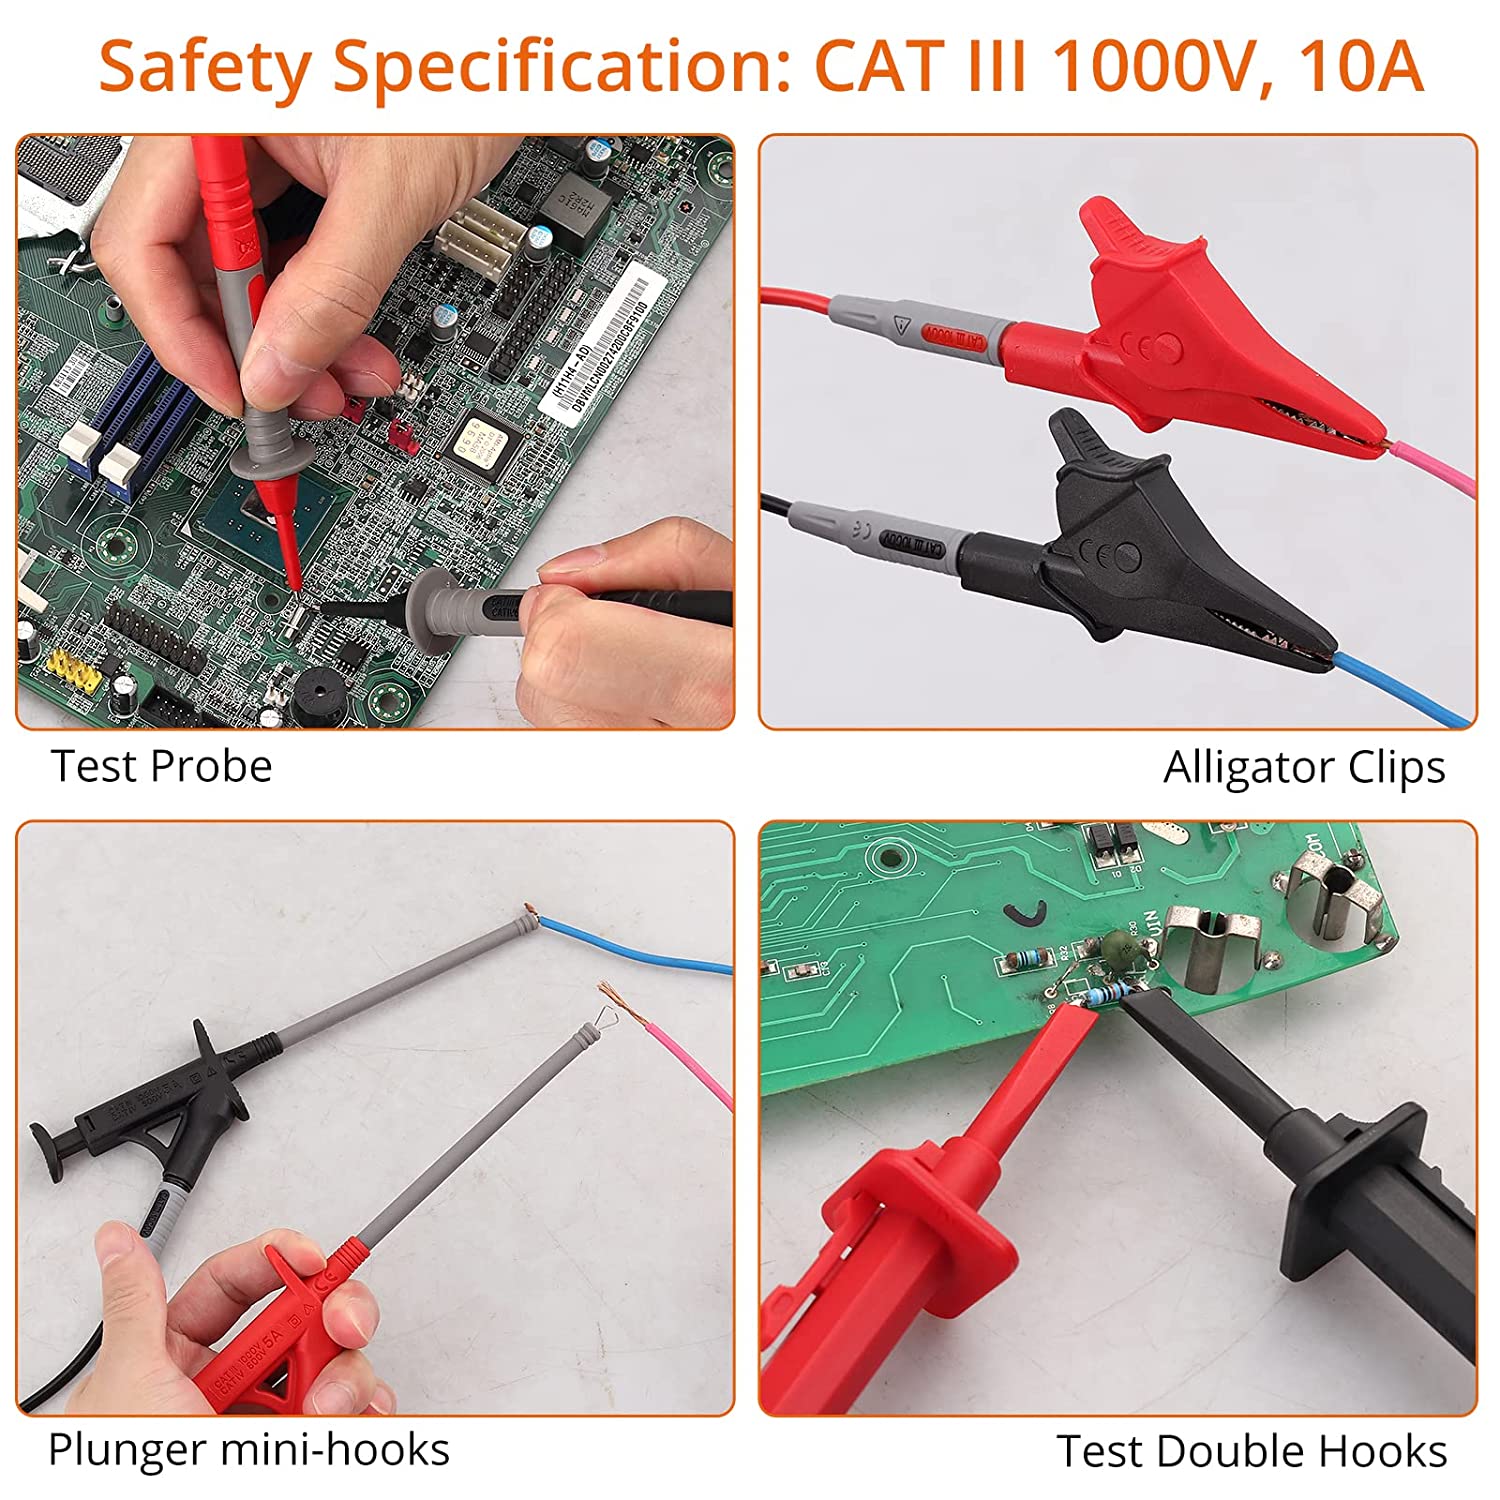 Proster Multimeter Test Leads Set with Alligator Clips Test Hook Test Probes Lead Professional Electrical Test Leads with Storage Pouch